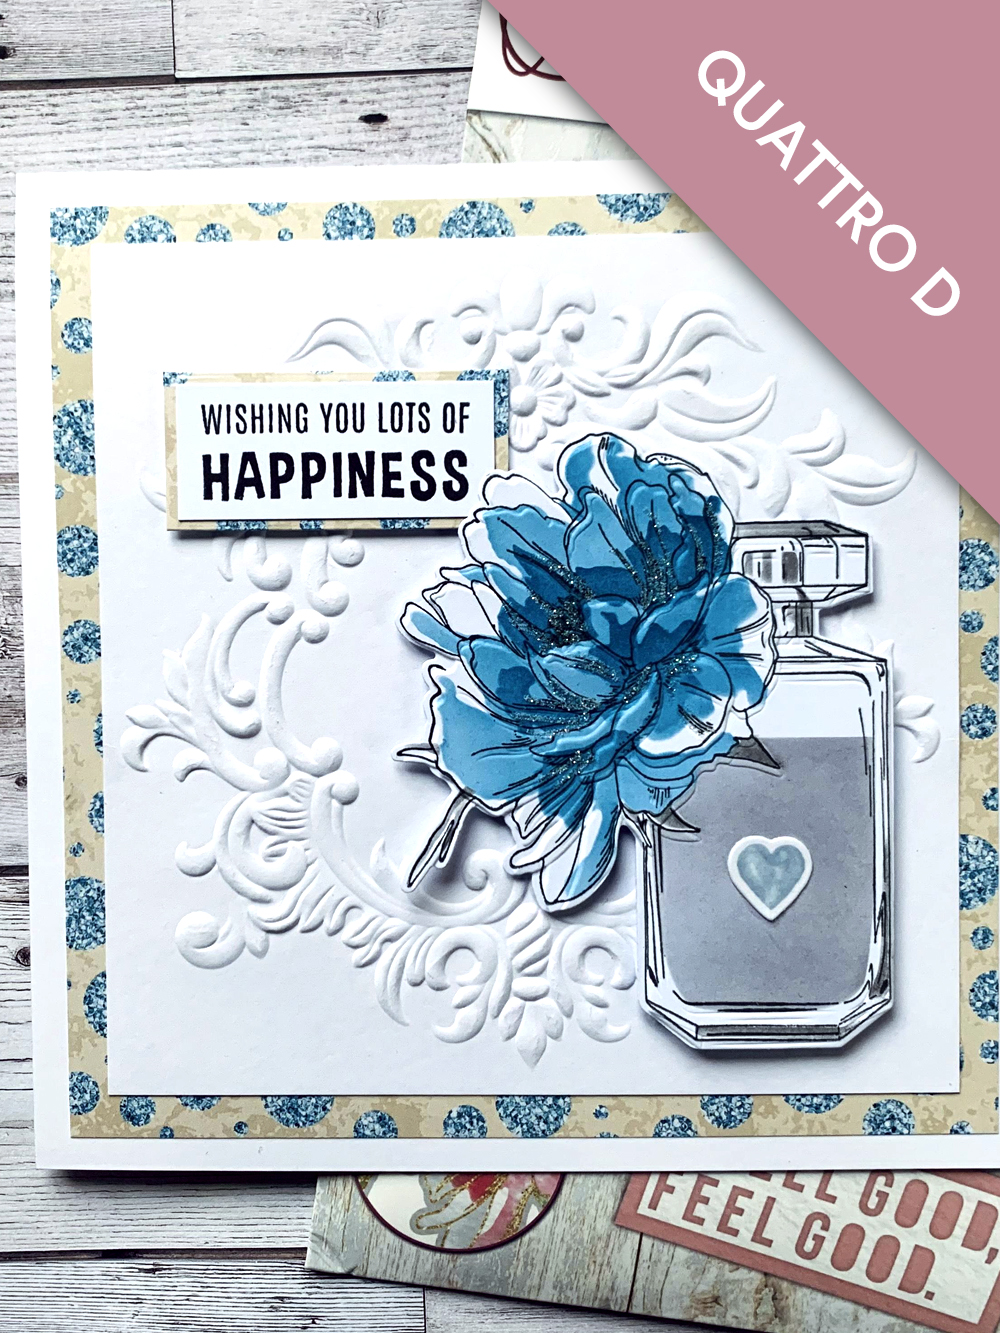 Wishing You Lots Of Happiness (card created by Elaine)